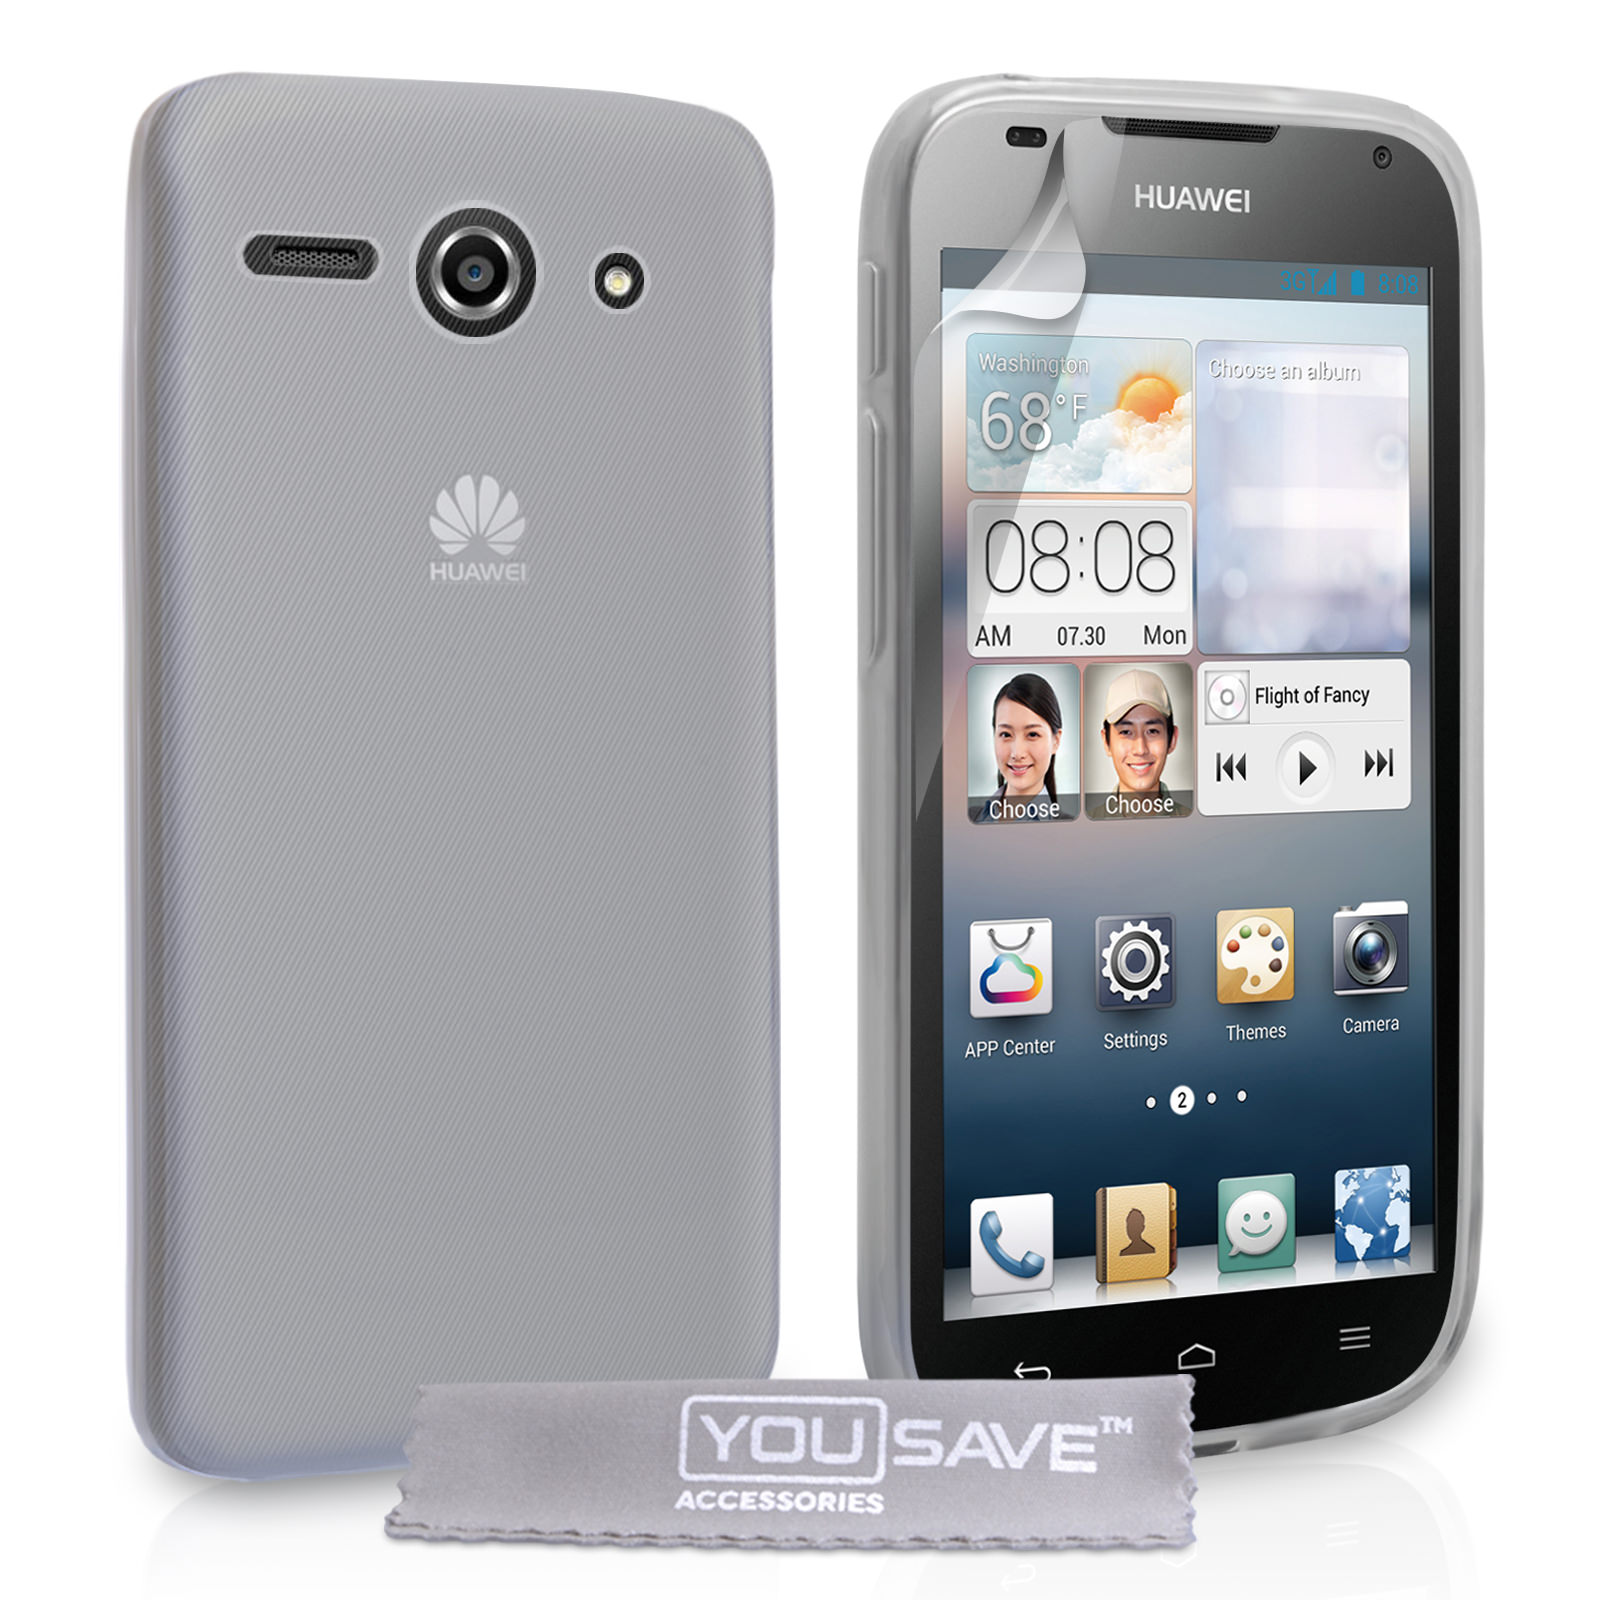 YouSave Accessories Huawei Ascend Y530 Silicone Gel Case - Clear